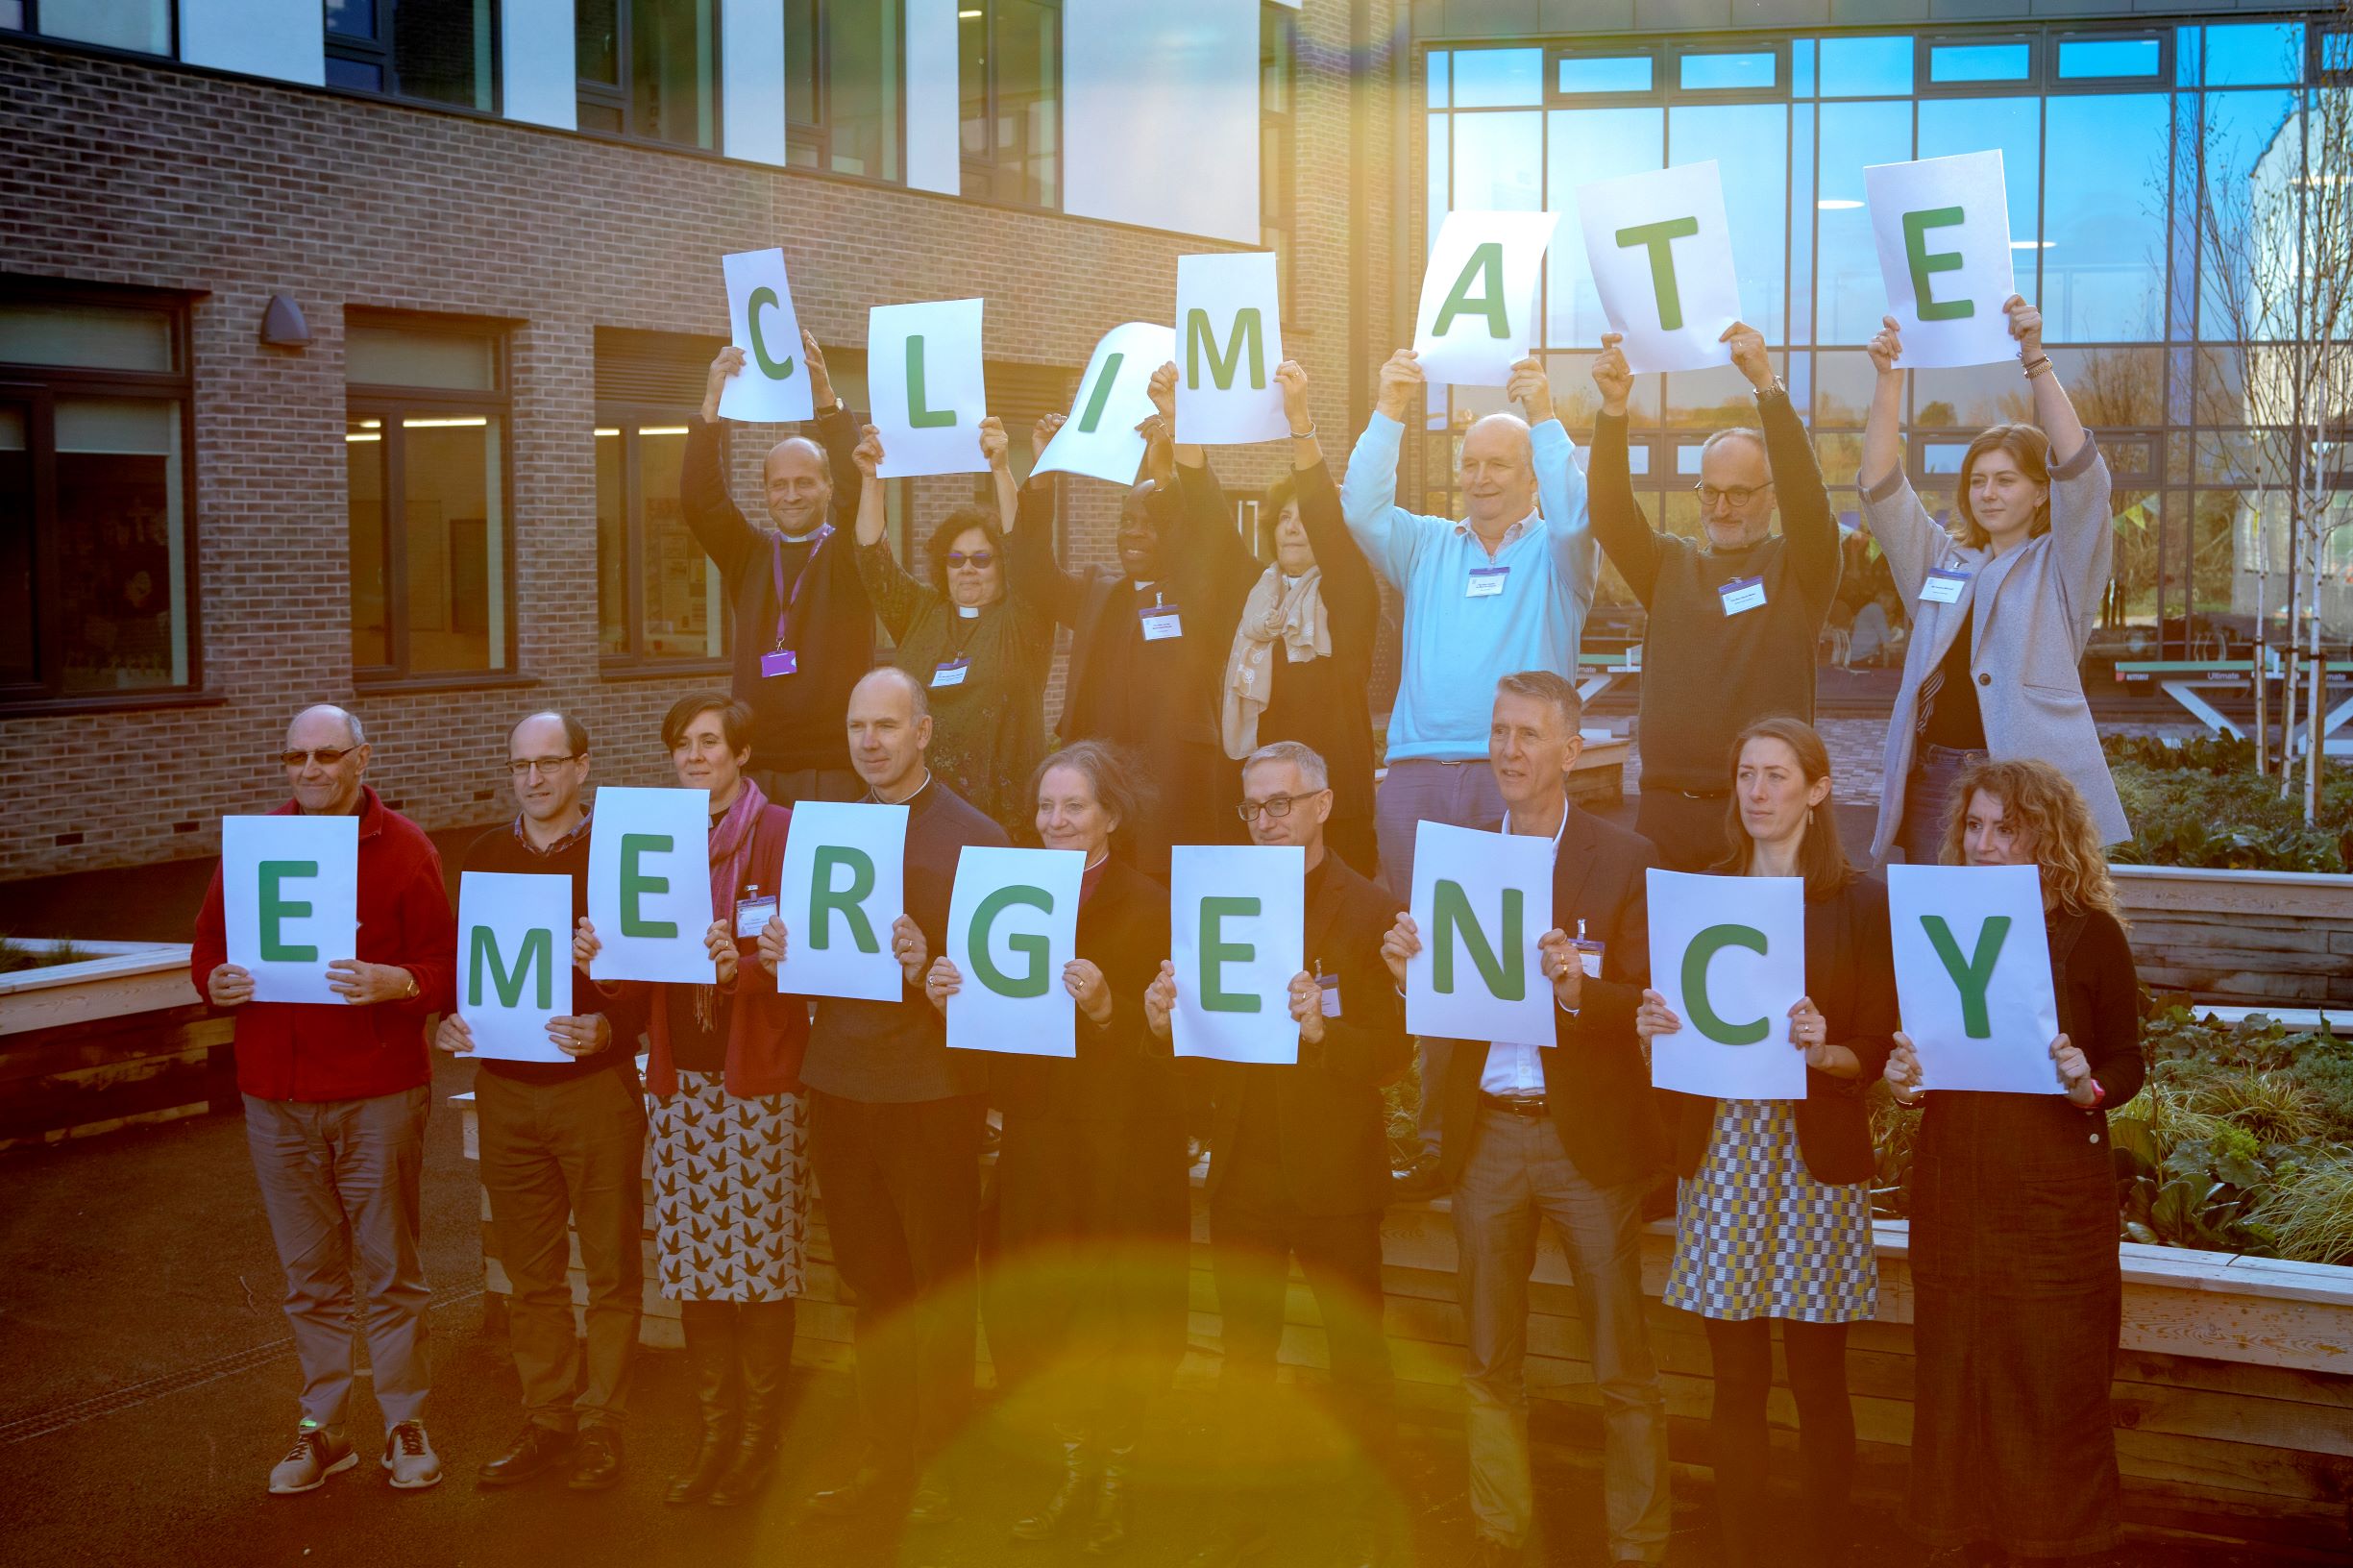 Open We’ve declared a climate emergency!